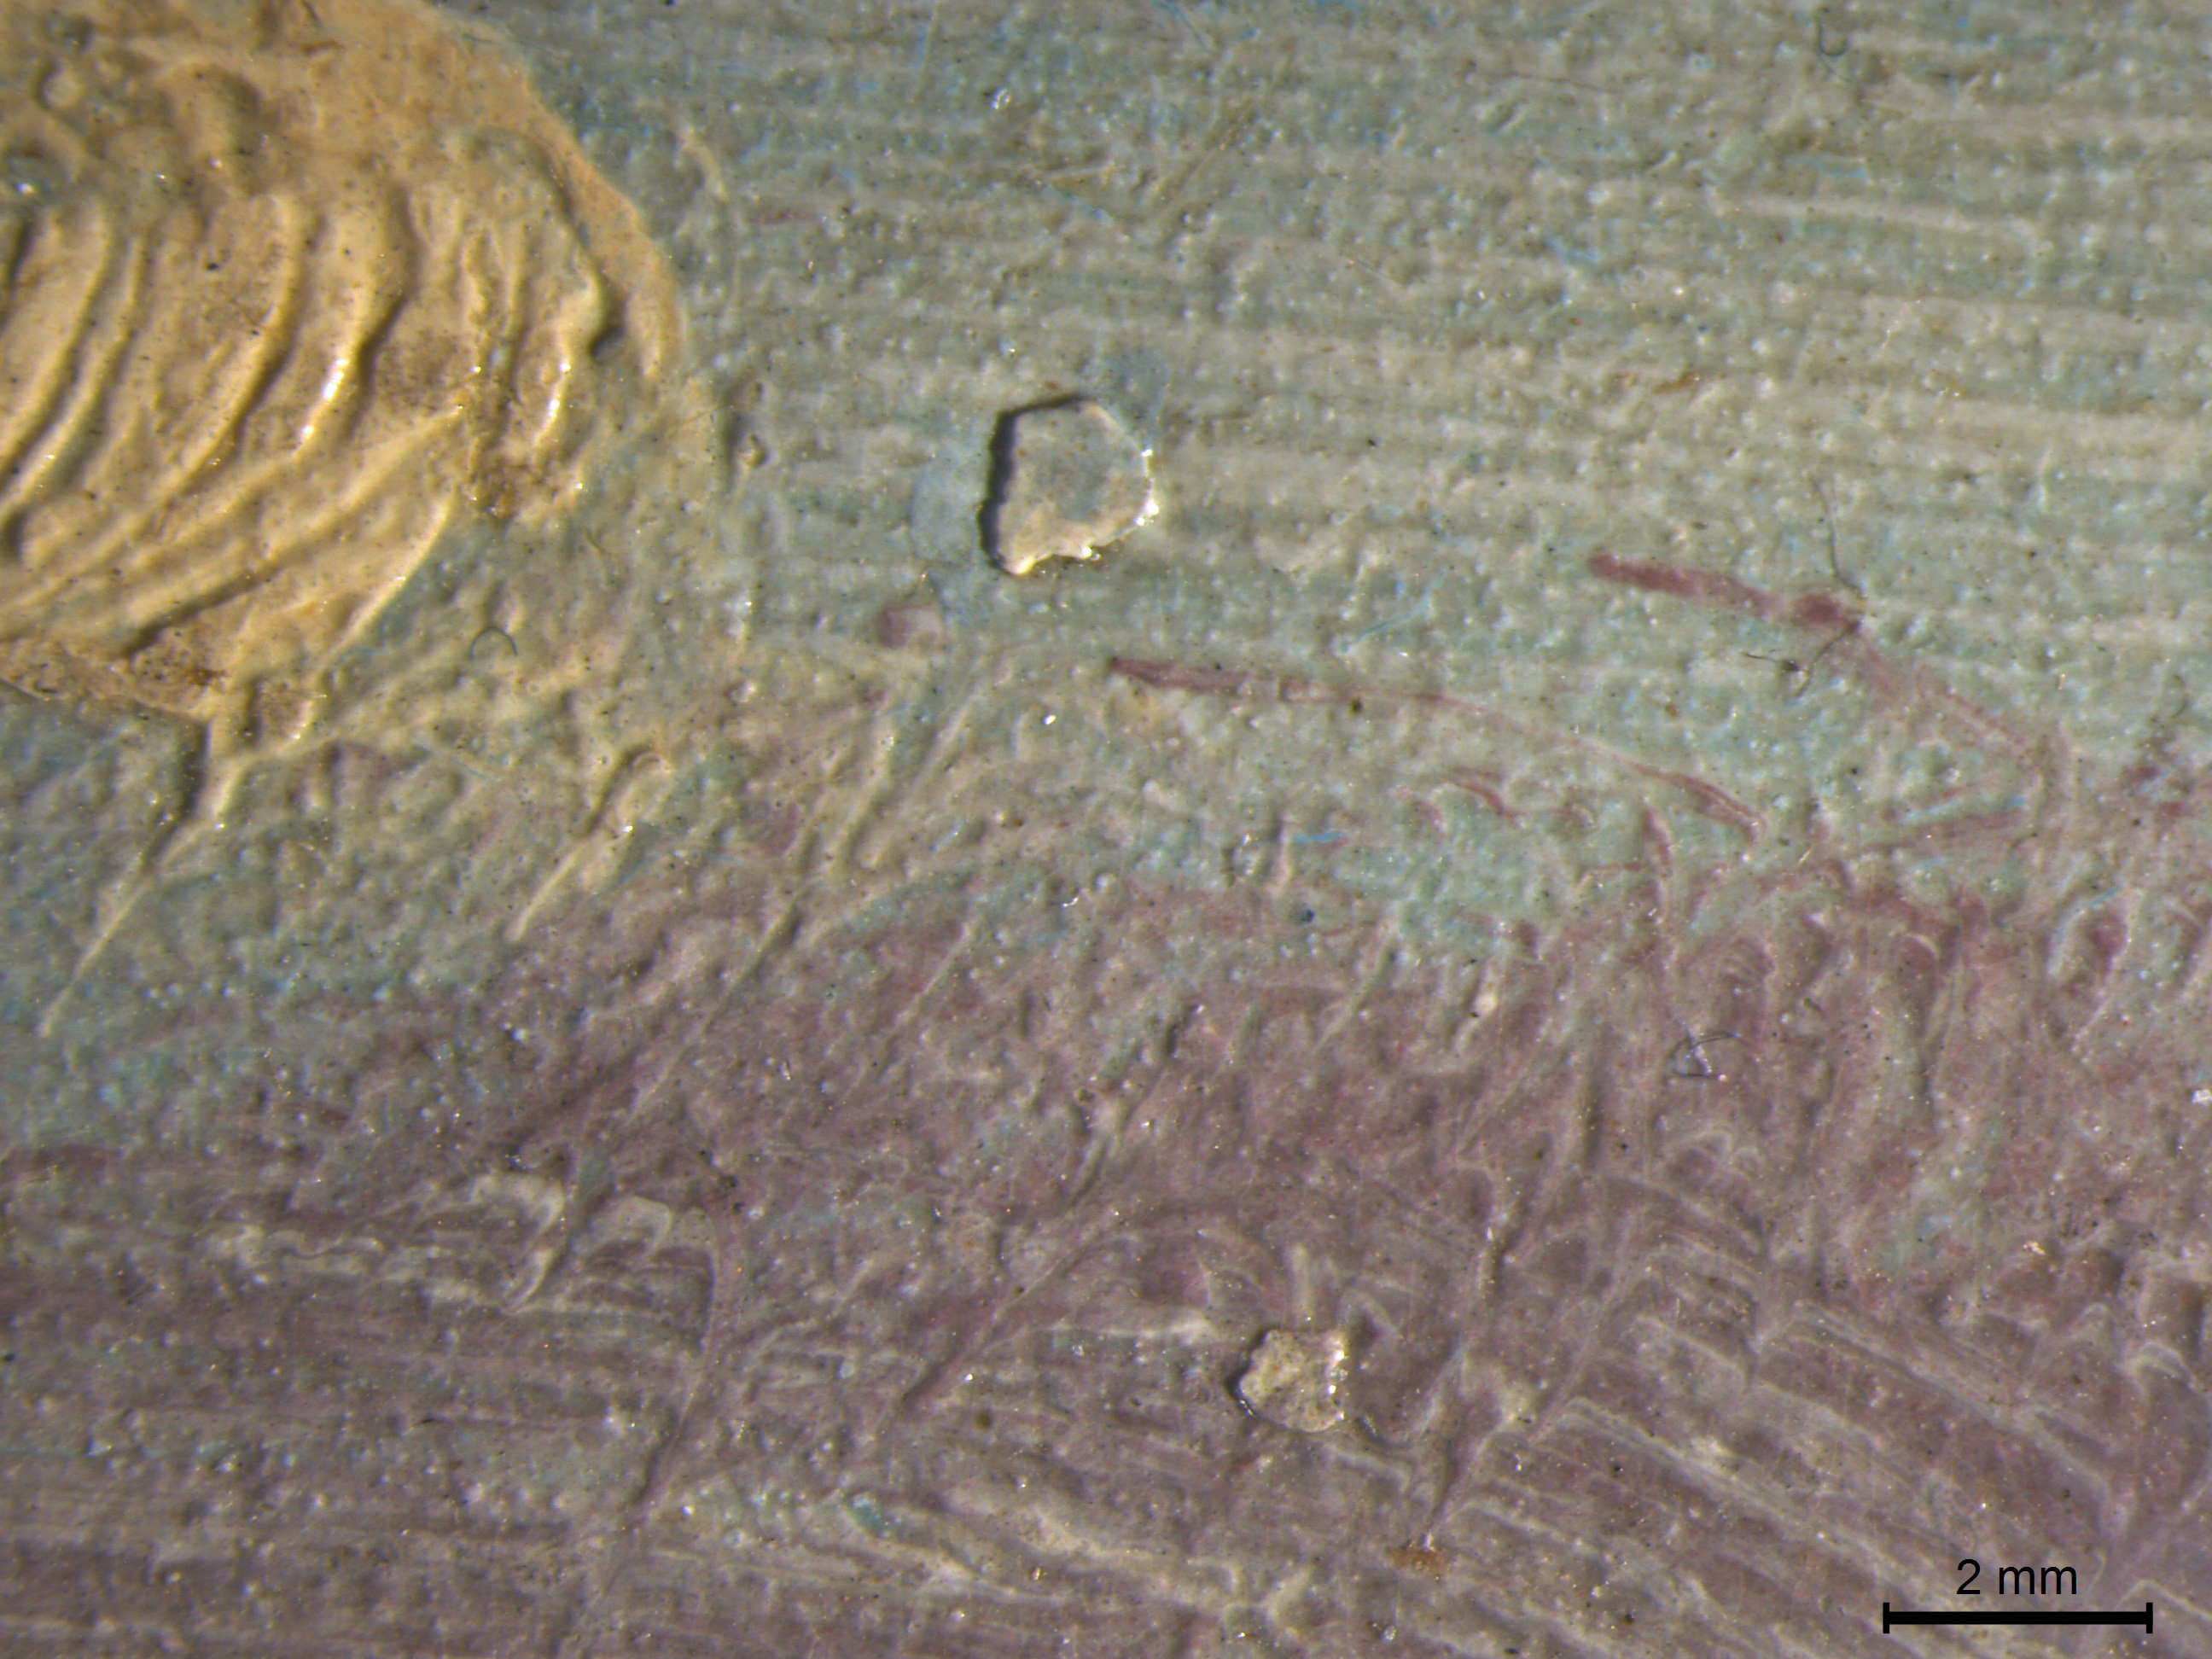 Magnified brushstrokes on an oil paint sketch showing a dried lump of paint caught within the brushmarks